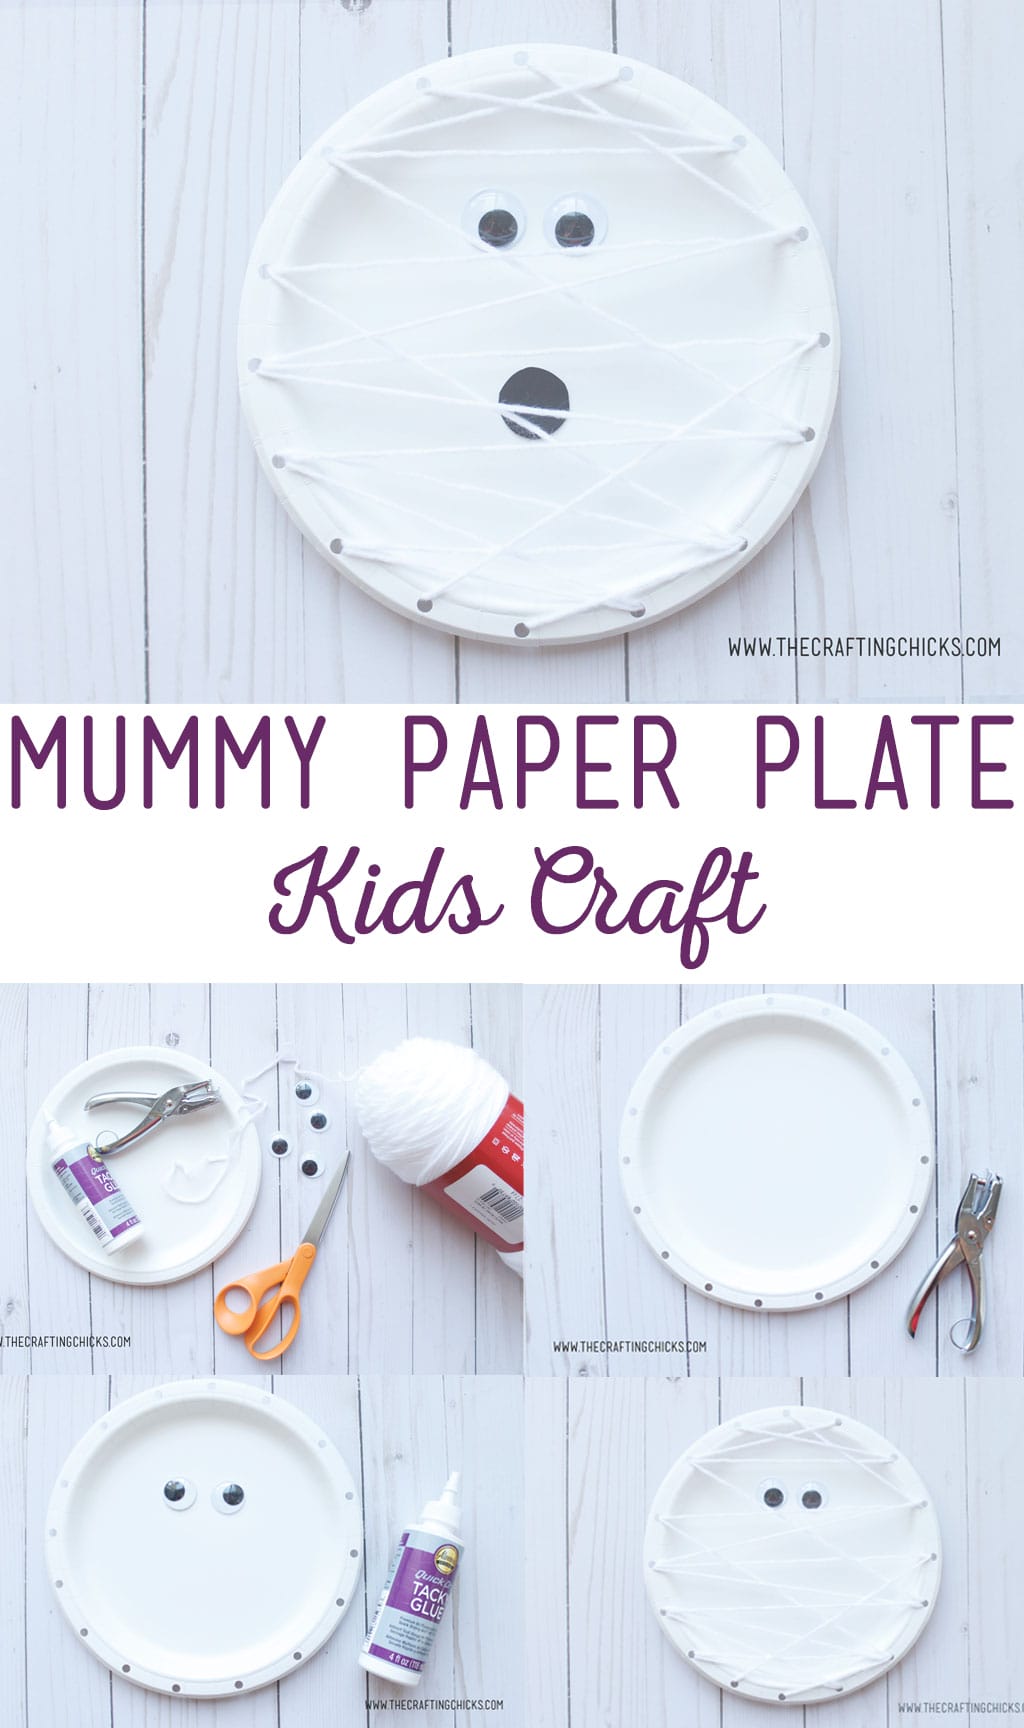 Mummy Paper Plate Kids Craft is a great way for kids to learn how to weave with yarn. This easy craft is great for children of all ages, starting in preschool. #kidscrafts #kidspaperplatecraft #halloweenkidscraft